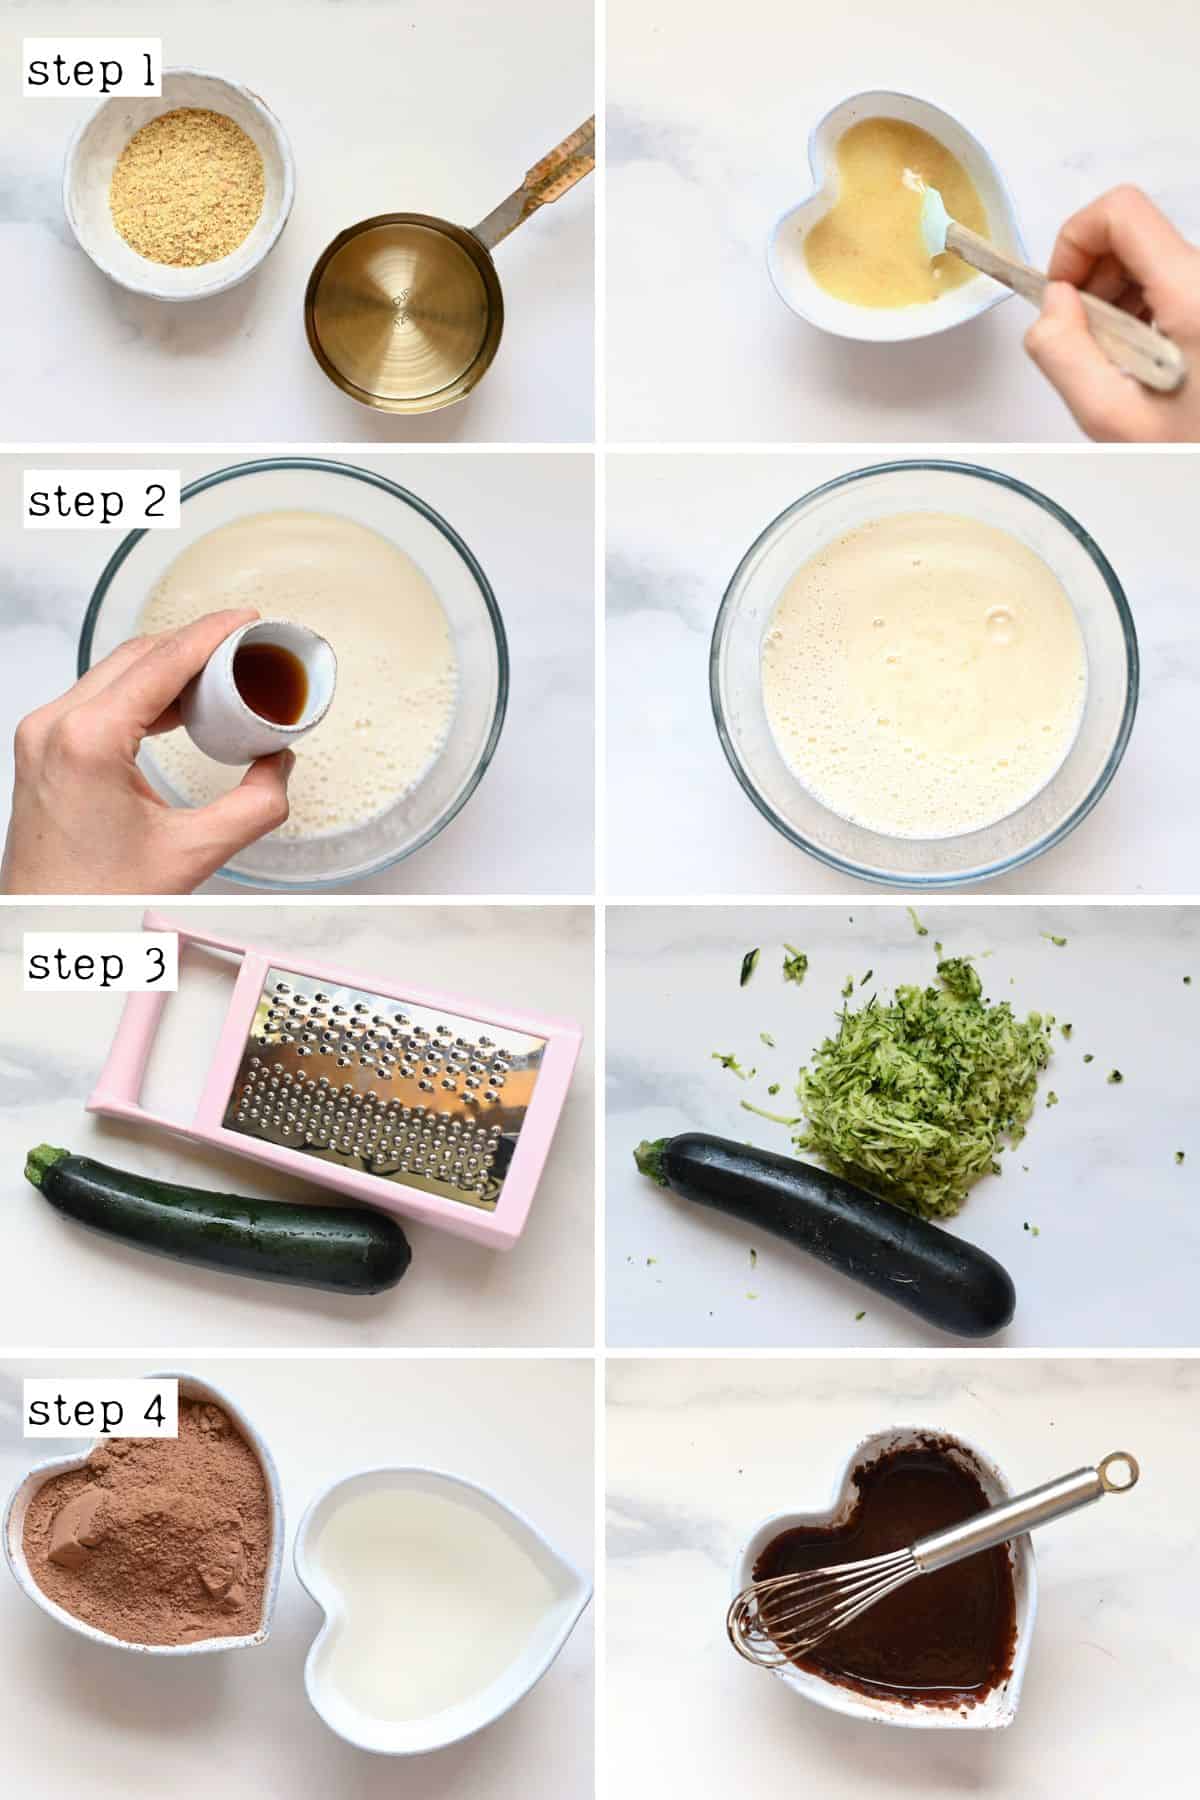 Steps for preparing the wet ingredients for chocolate cake